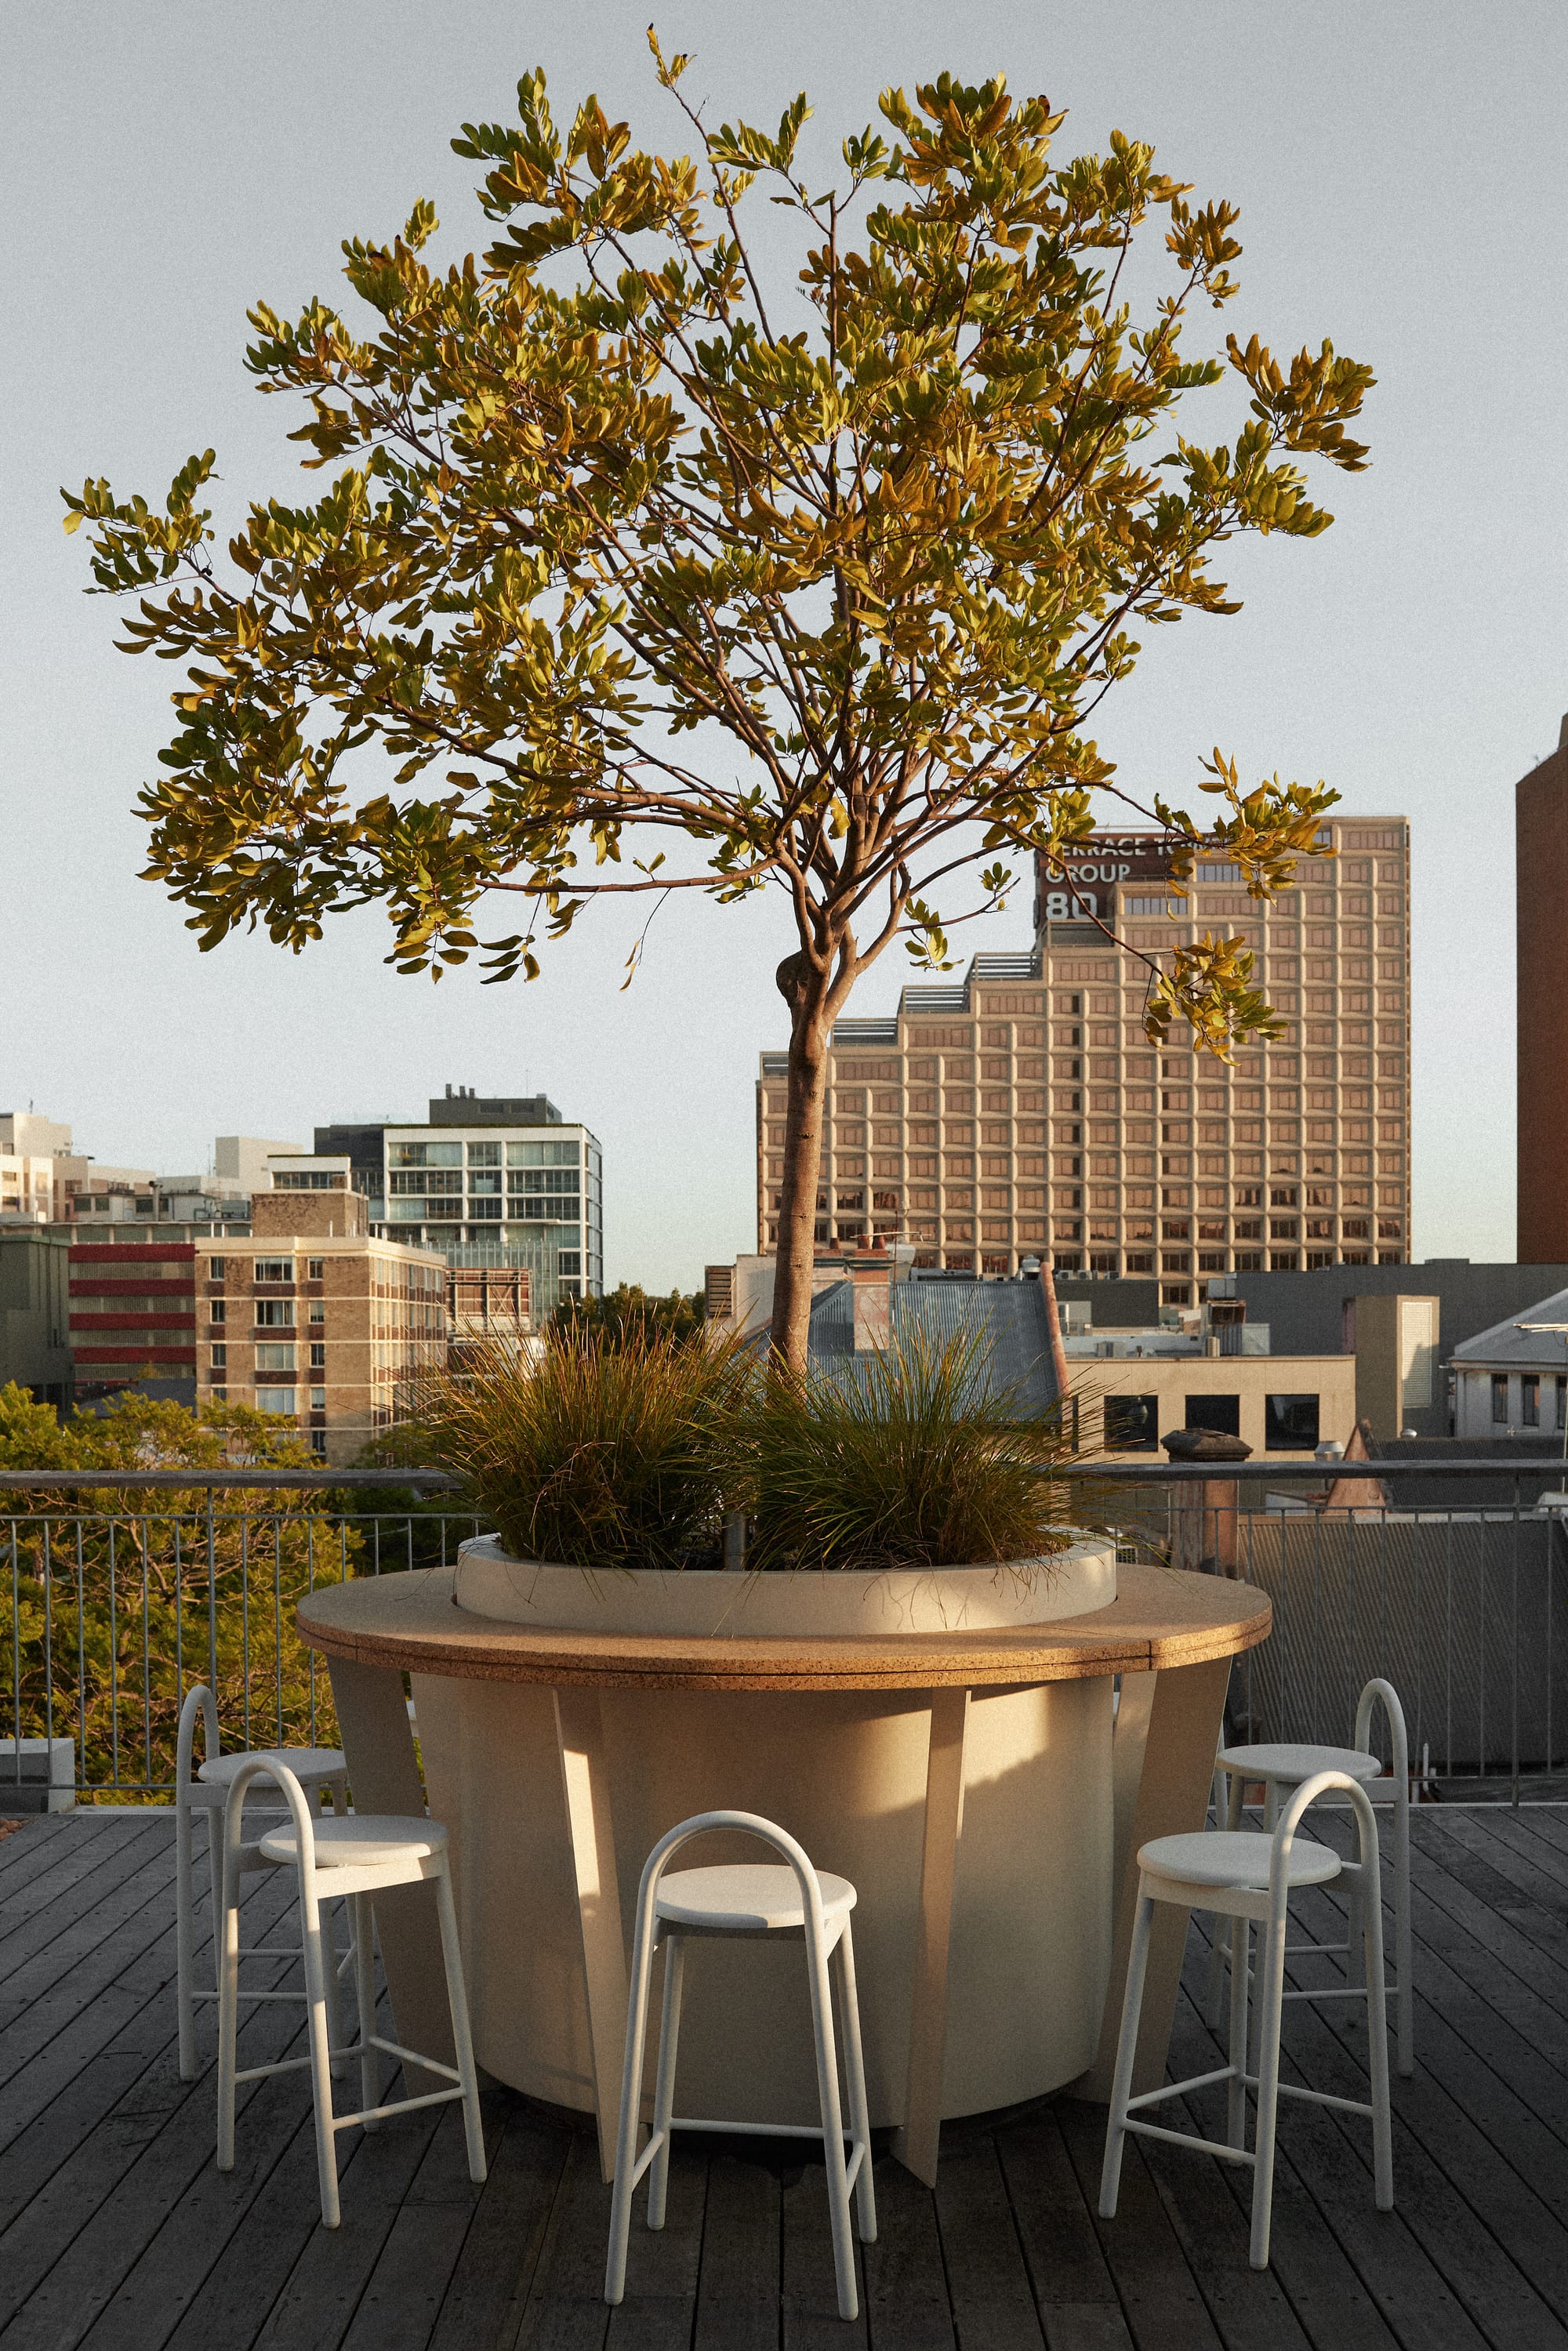 Riley Roof by Studio Shand. Photography by Traianos Pakioufakis. Rooftop garden with timber deckling on floor and city views. Benchtop wraps around large potted tree. White bench stools. 